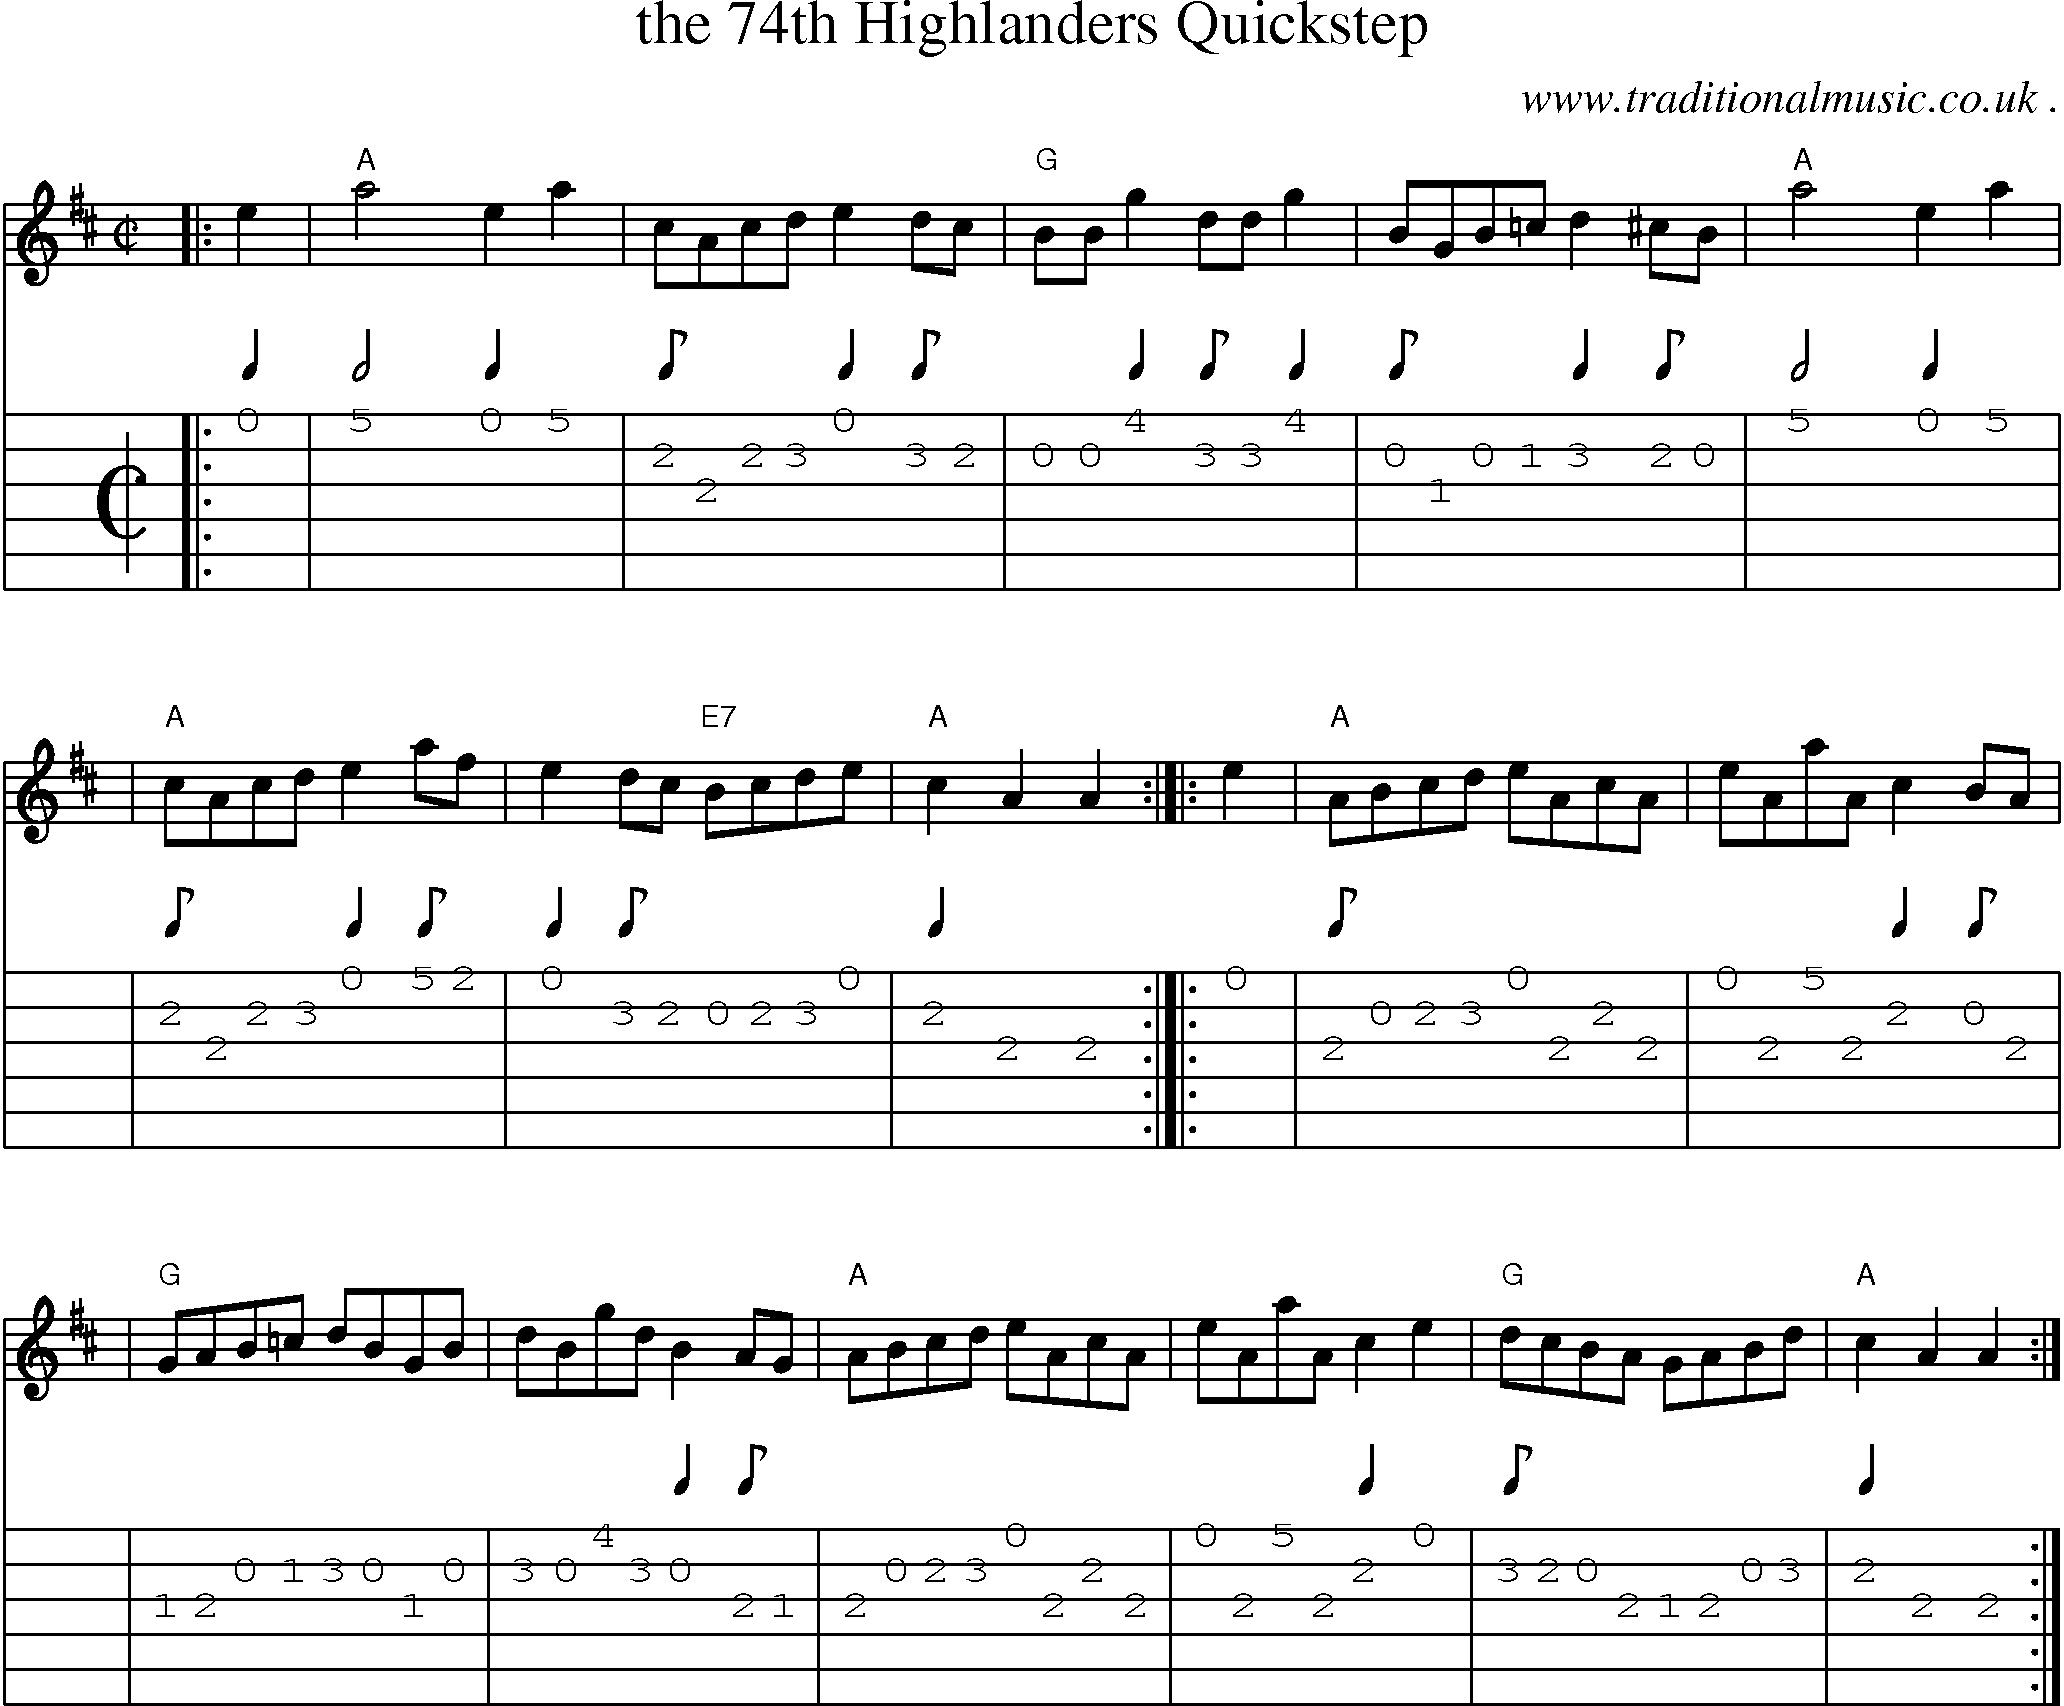 Sheet-music  score, Chords and Guitar Tabs for The 74th Highlanders Quickstep